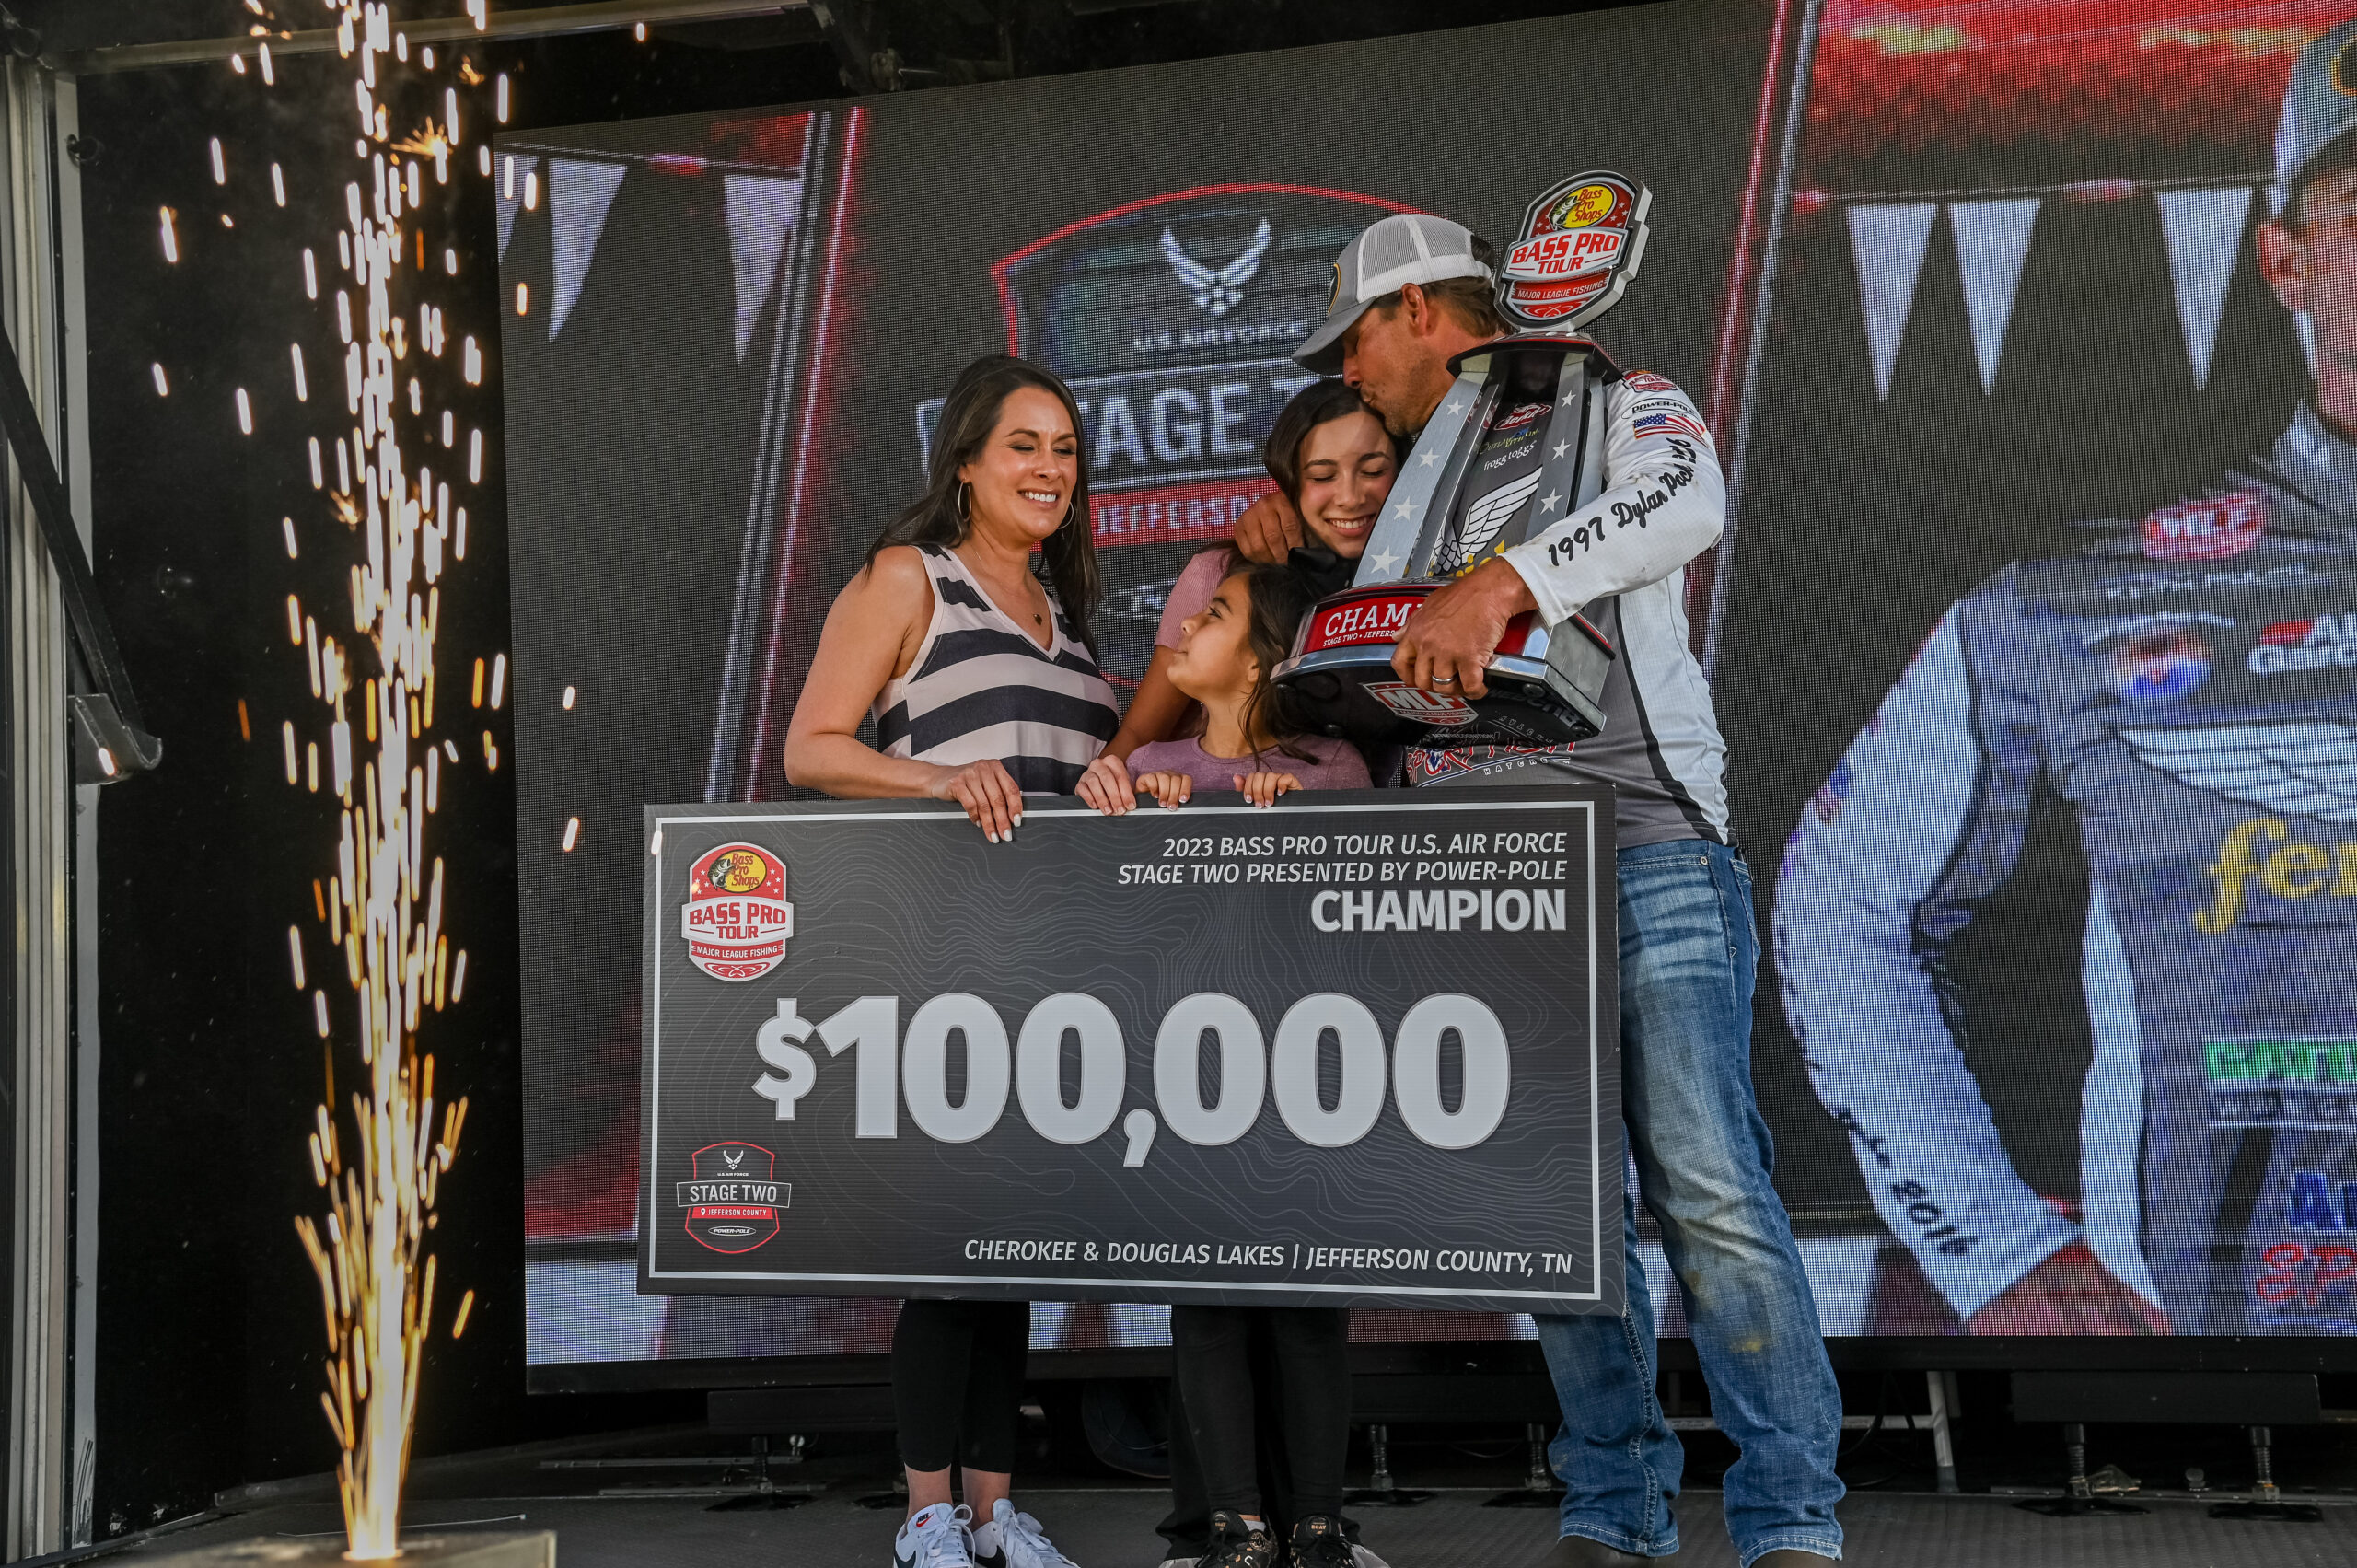 Alabama's Keith Poche earns first Bass Pro Tour victory at U.S. Air Force  Stage Two Presented by Power-Pole - Major League Fishing